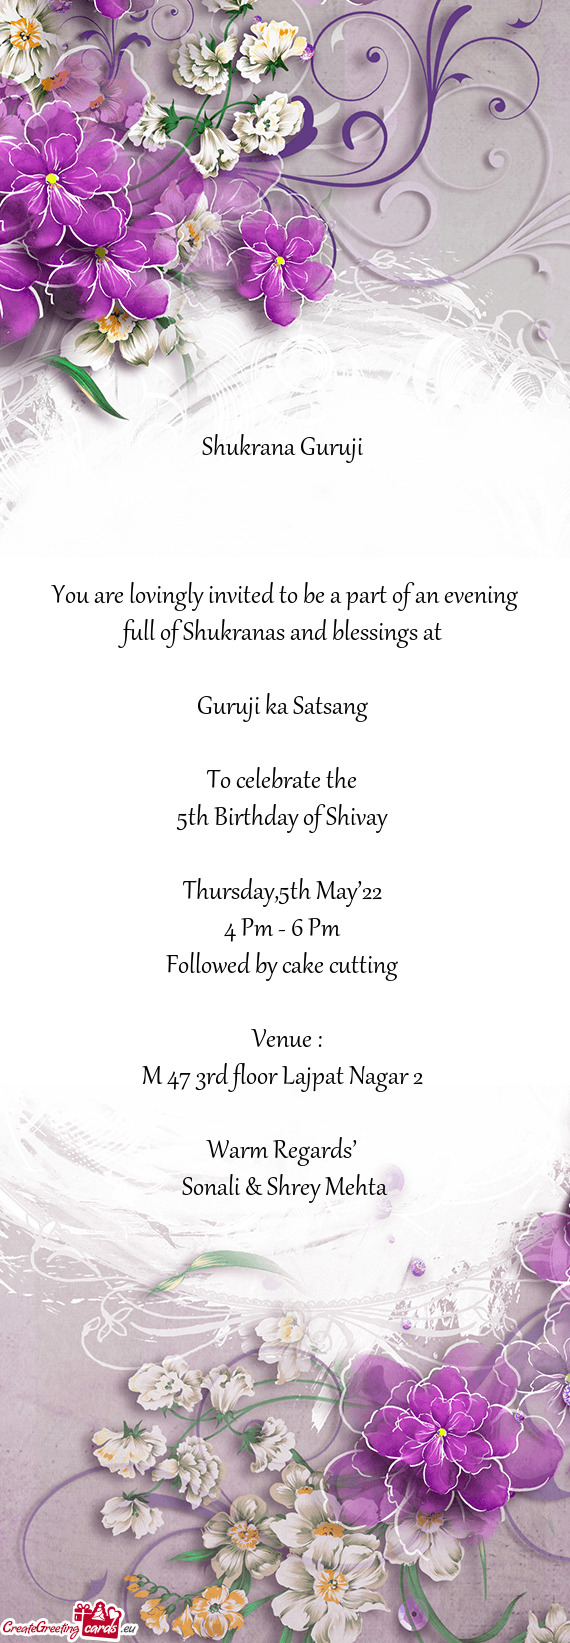 You are lovingly invited to be a part of an evening full of Shukranas and blessings at